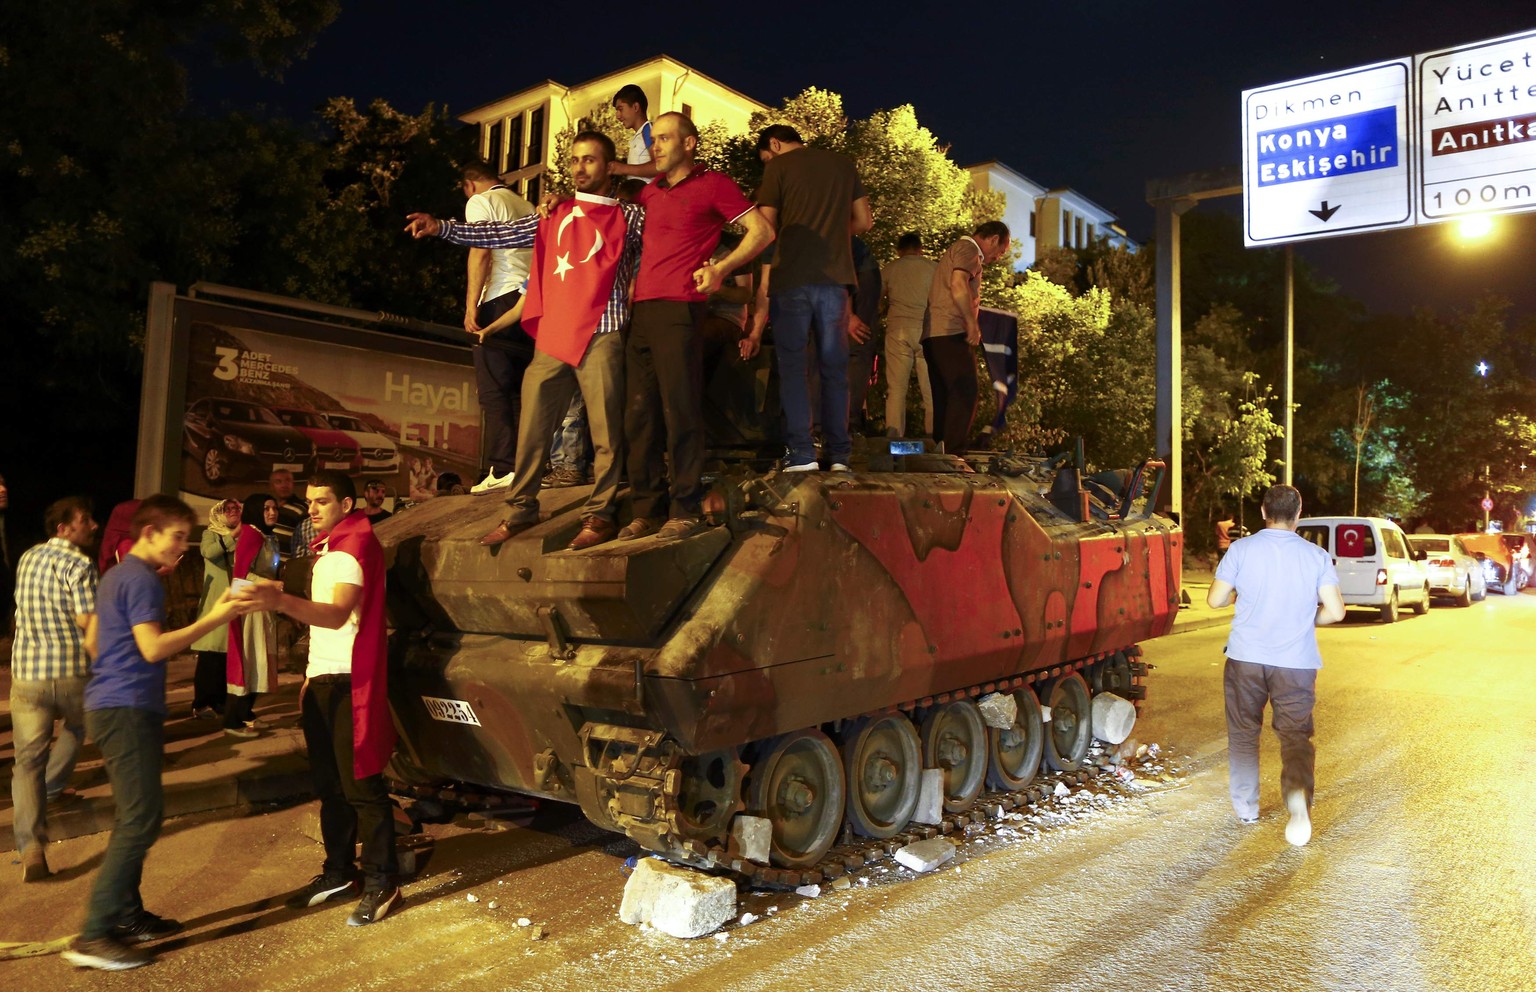 Supporters of Turkish President Tayyip Erdogan stand on an abandoned tank during a demonstration outside parliament building in Ankara, Turkey, July 16, 2016. REUTERS/Osman Orsal